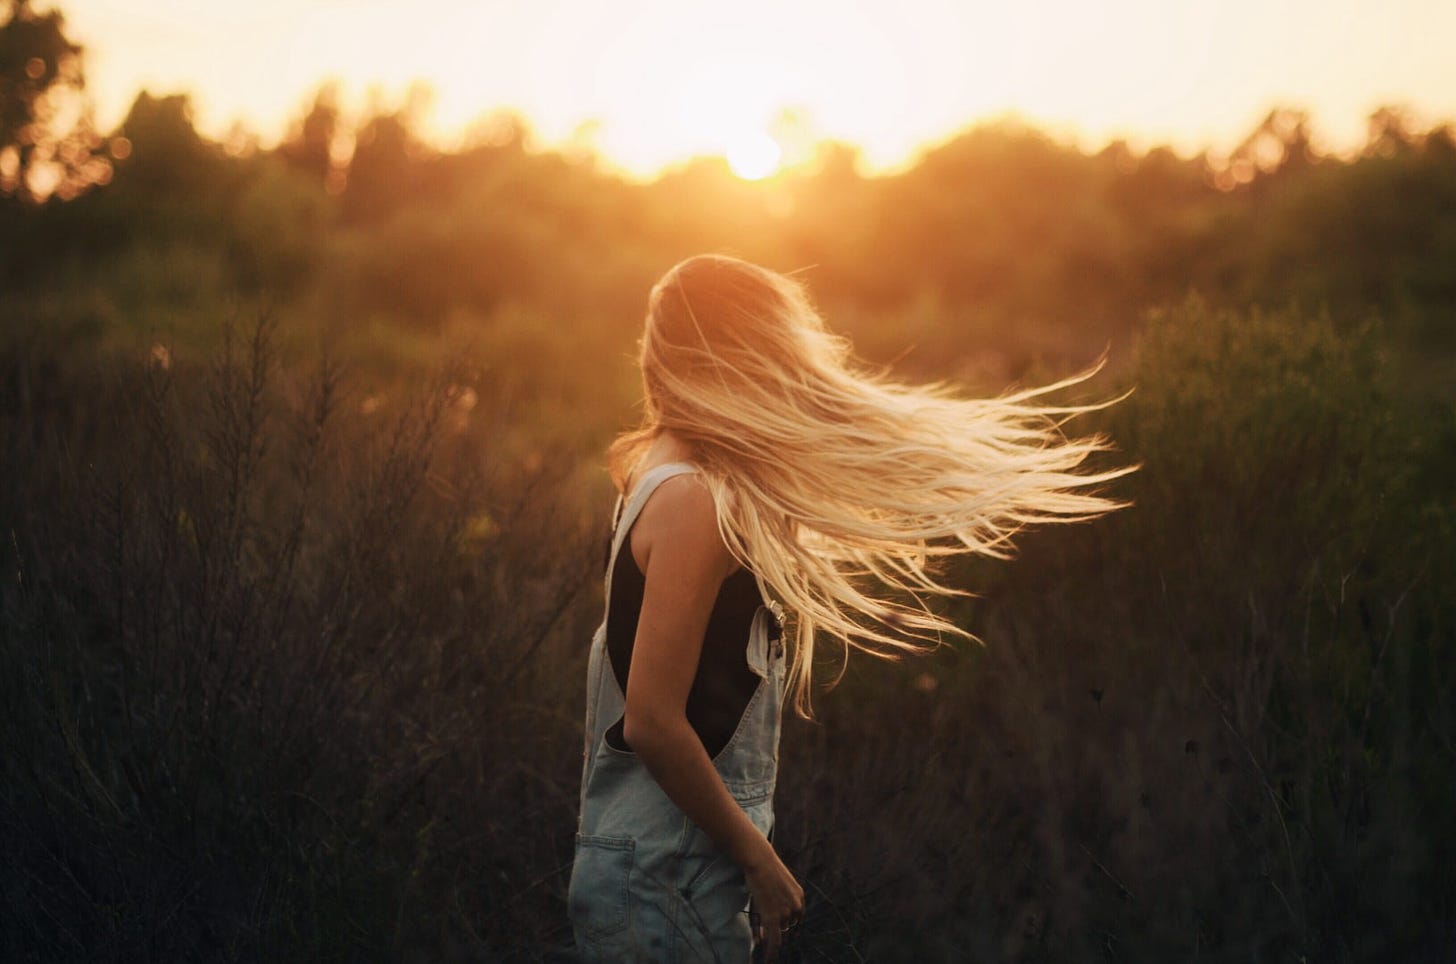 A woman with long blond hair dances in a field at sunset.